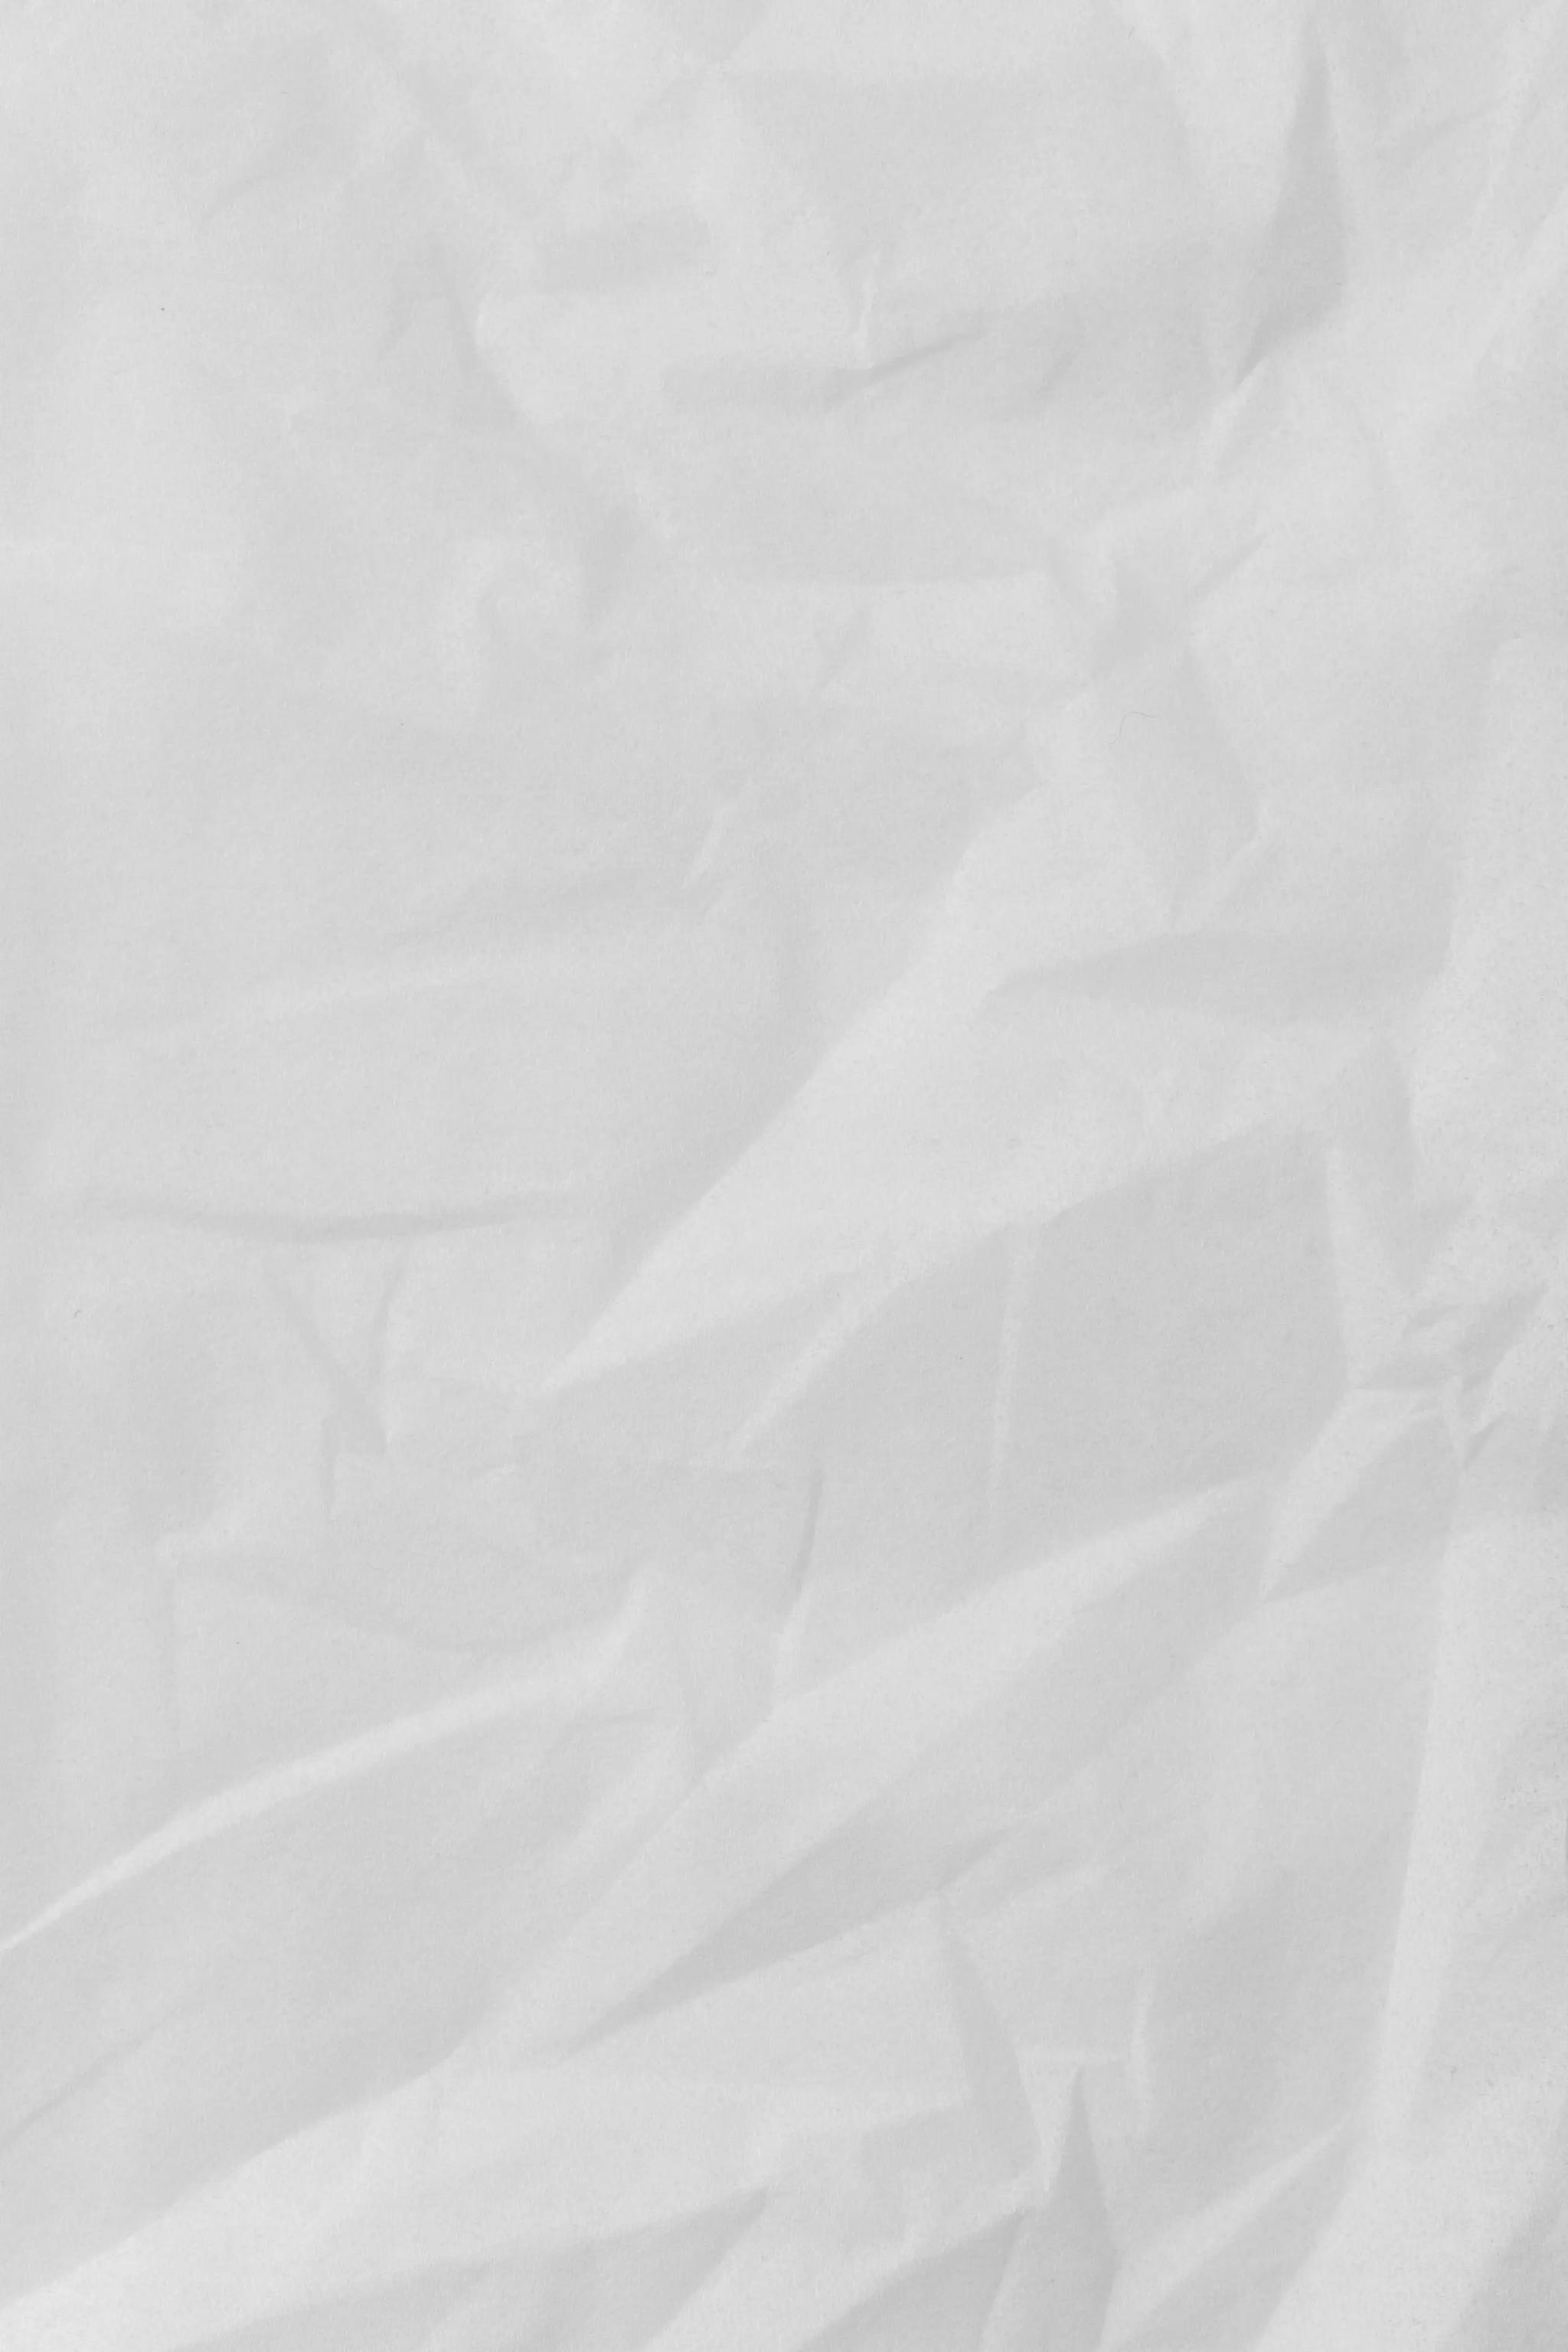 Page Wrapper Background